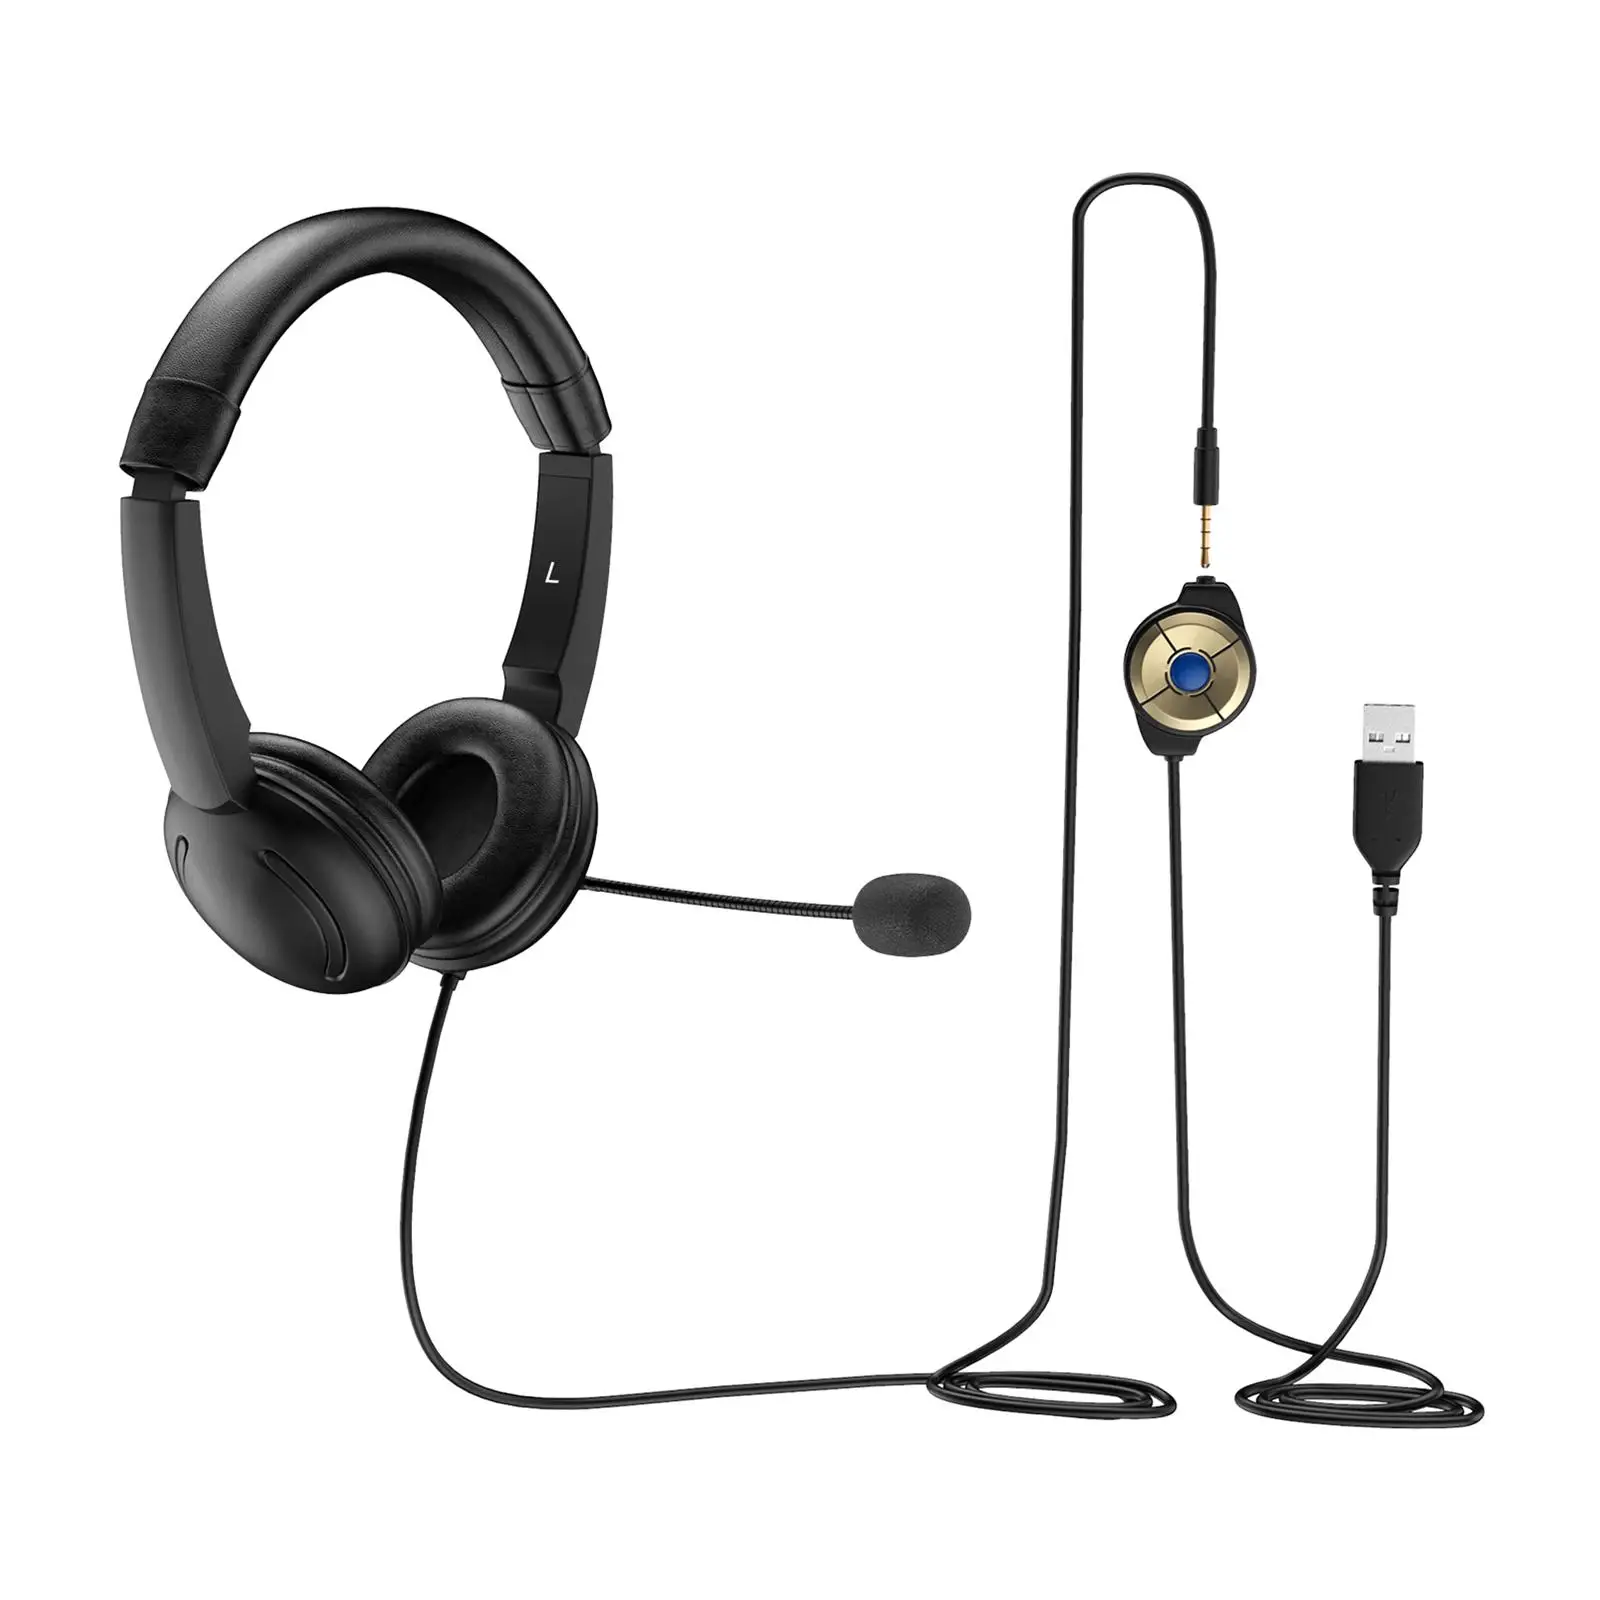 USB Headset Premium with Microphone Lightweight Comfortable Wired Call Center Headset for Laptop PC Office Video Meetings Music